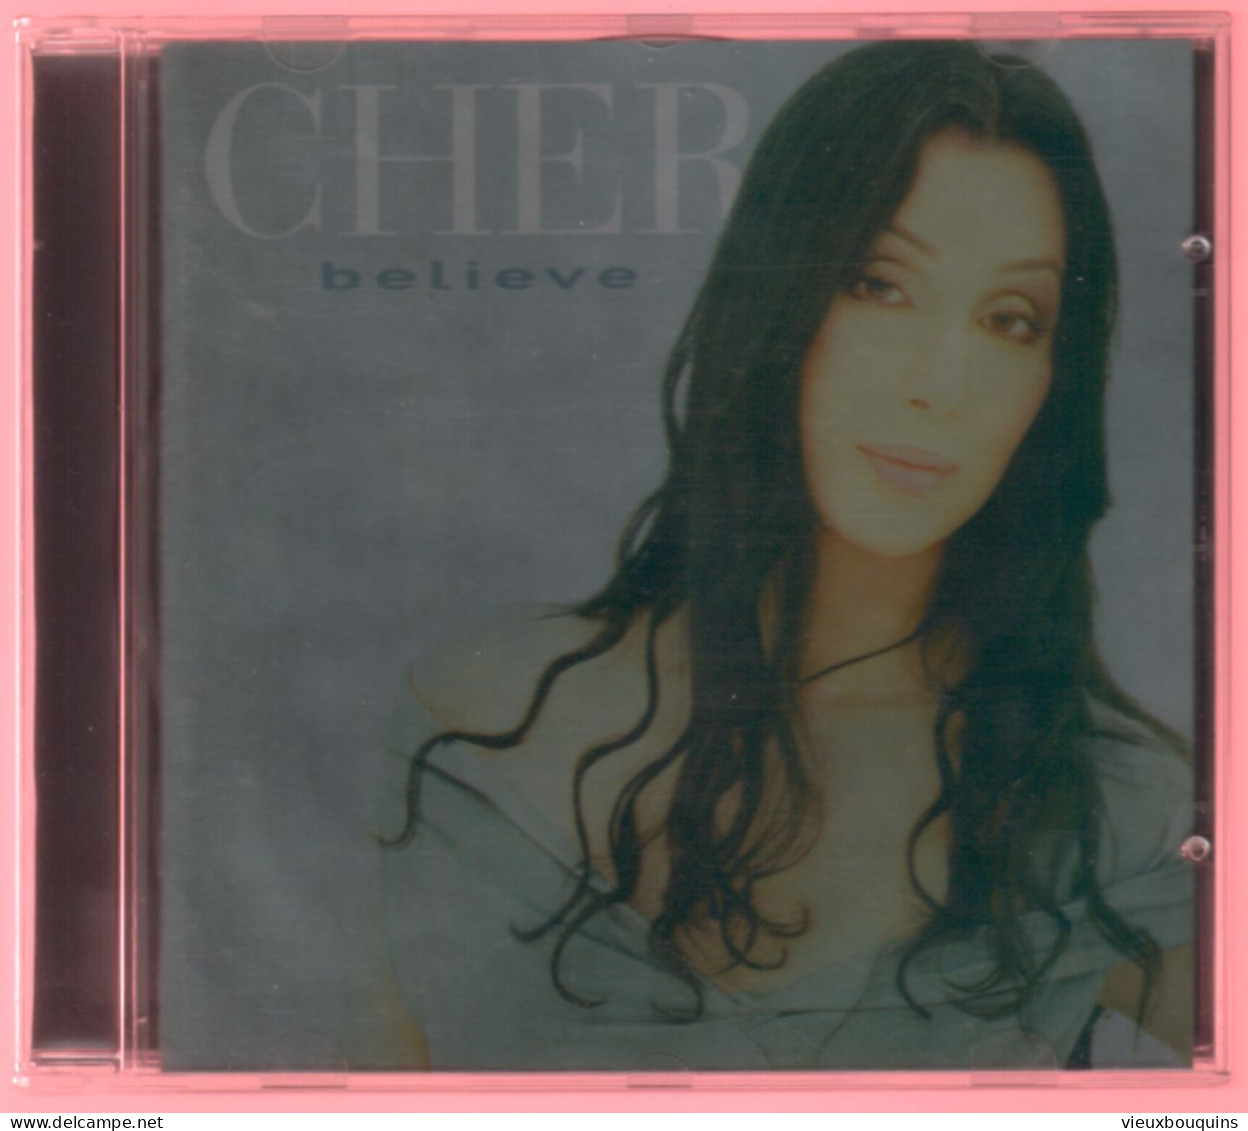 CHER : BELIEVE - Other - English Music